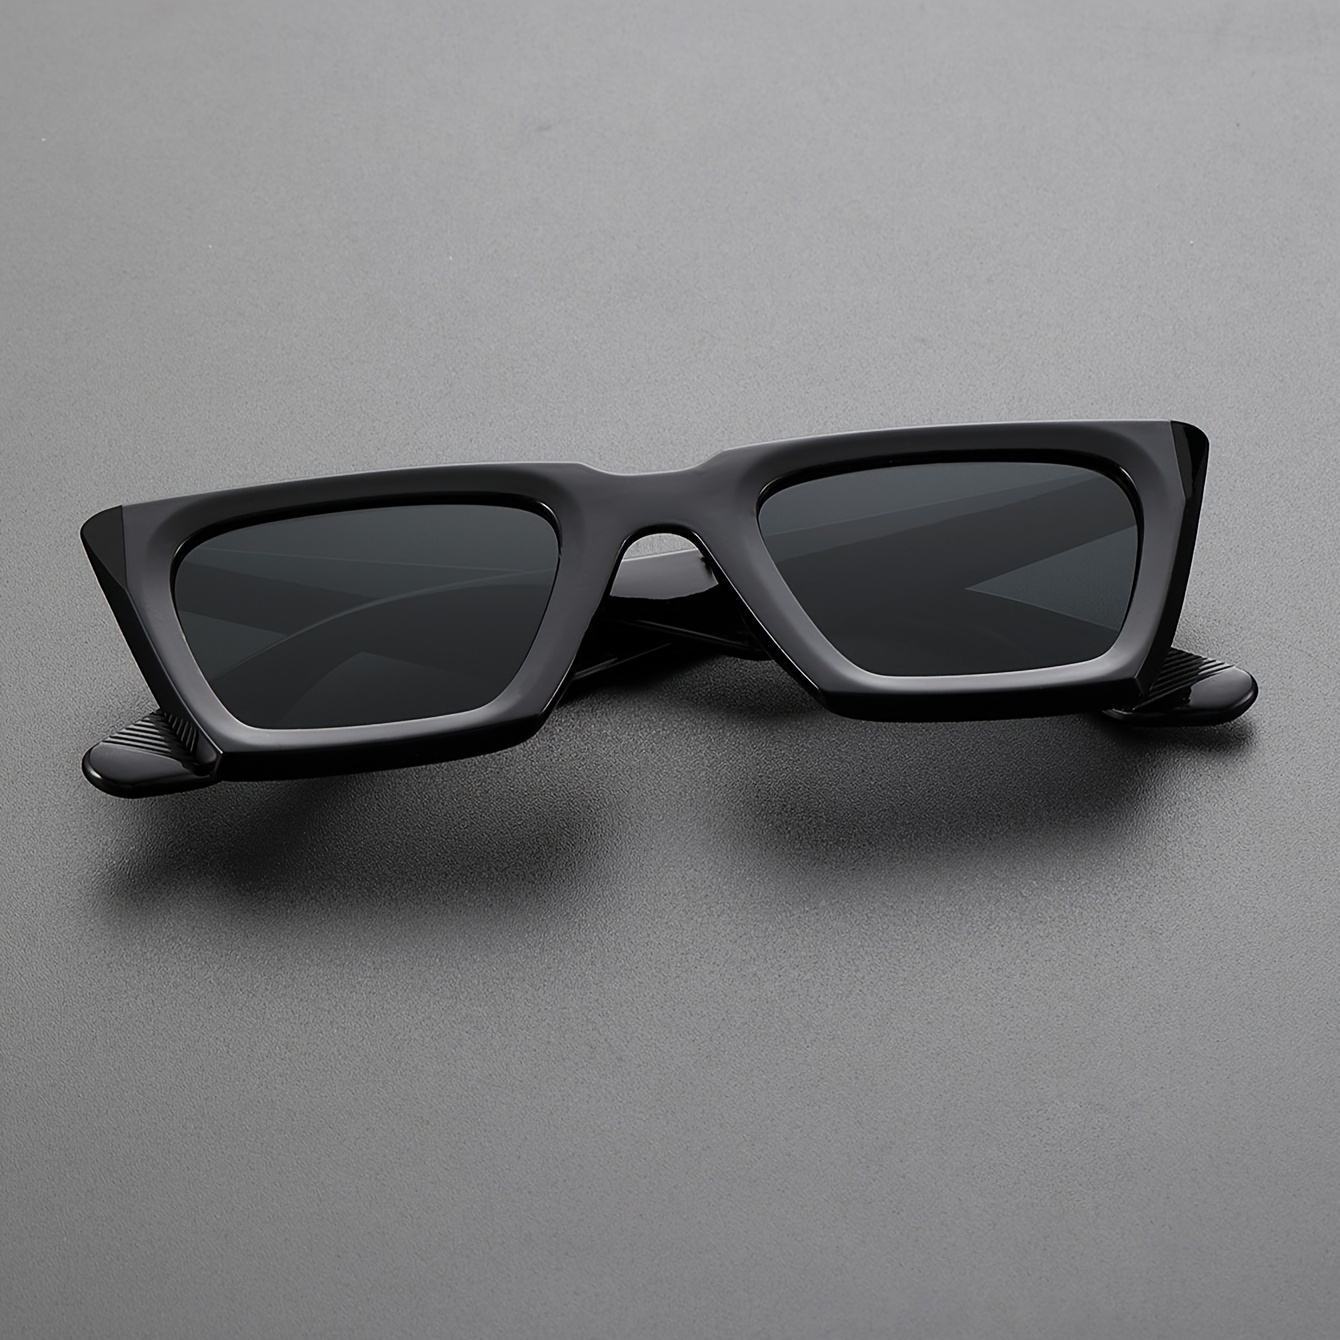 1pc Men's Fashion Black Full Frame Sunglasses, ideal choice for gifts